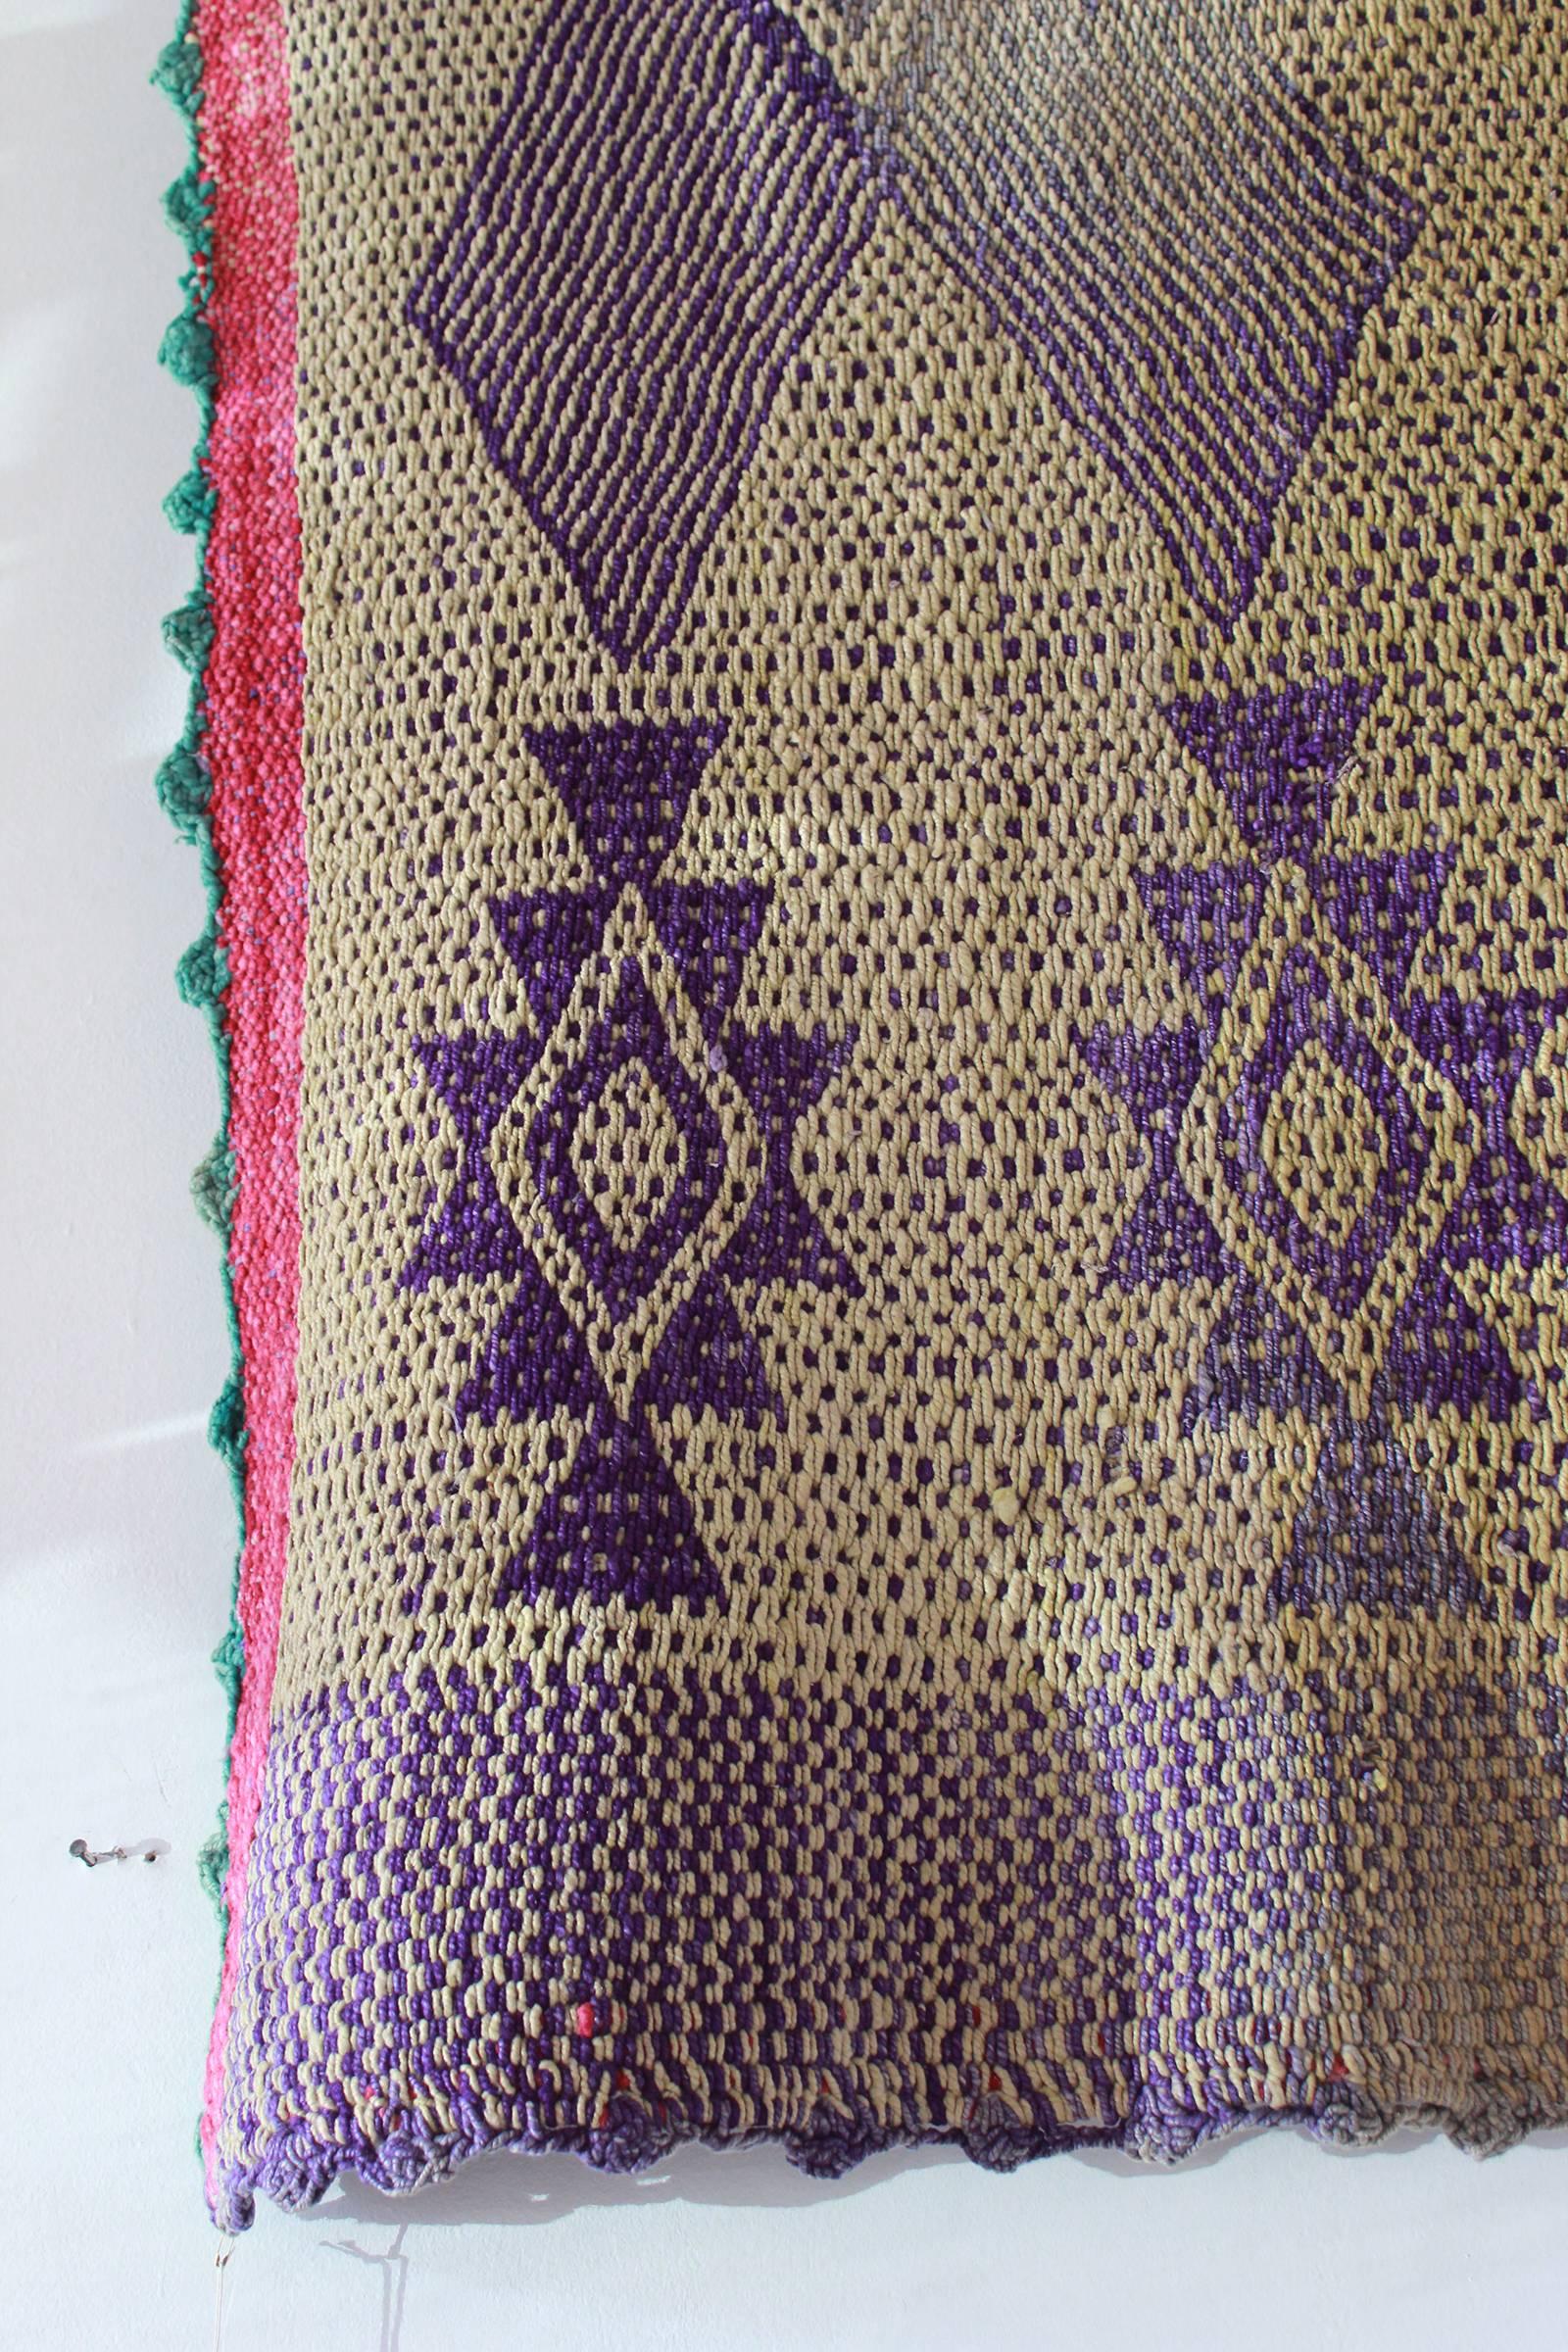 Mid-20th Century Peruvian Handwoven Textile with Violet Geometric Details